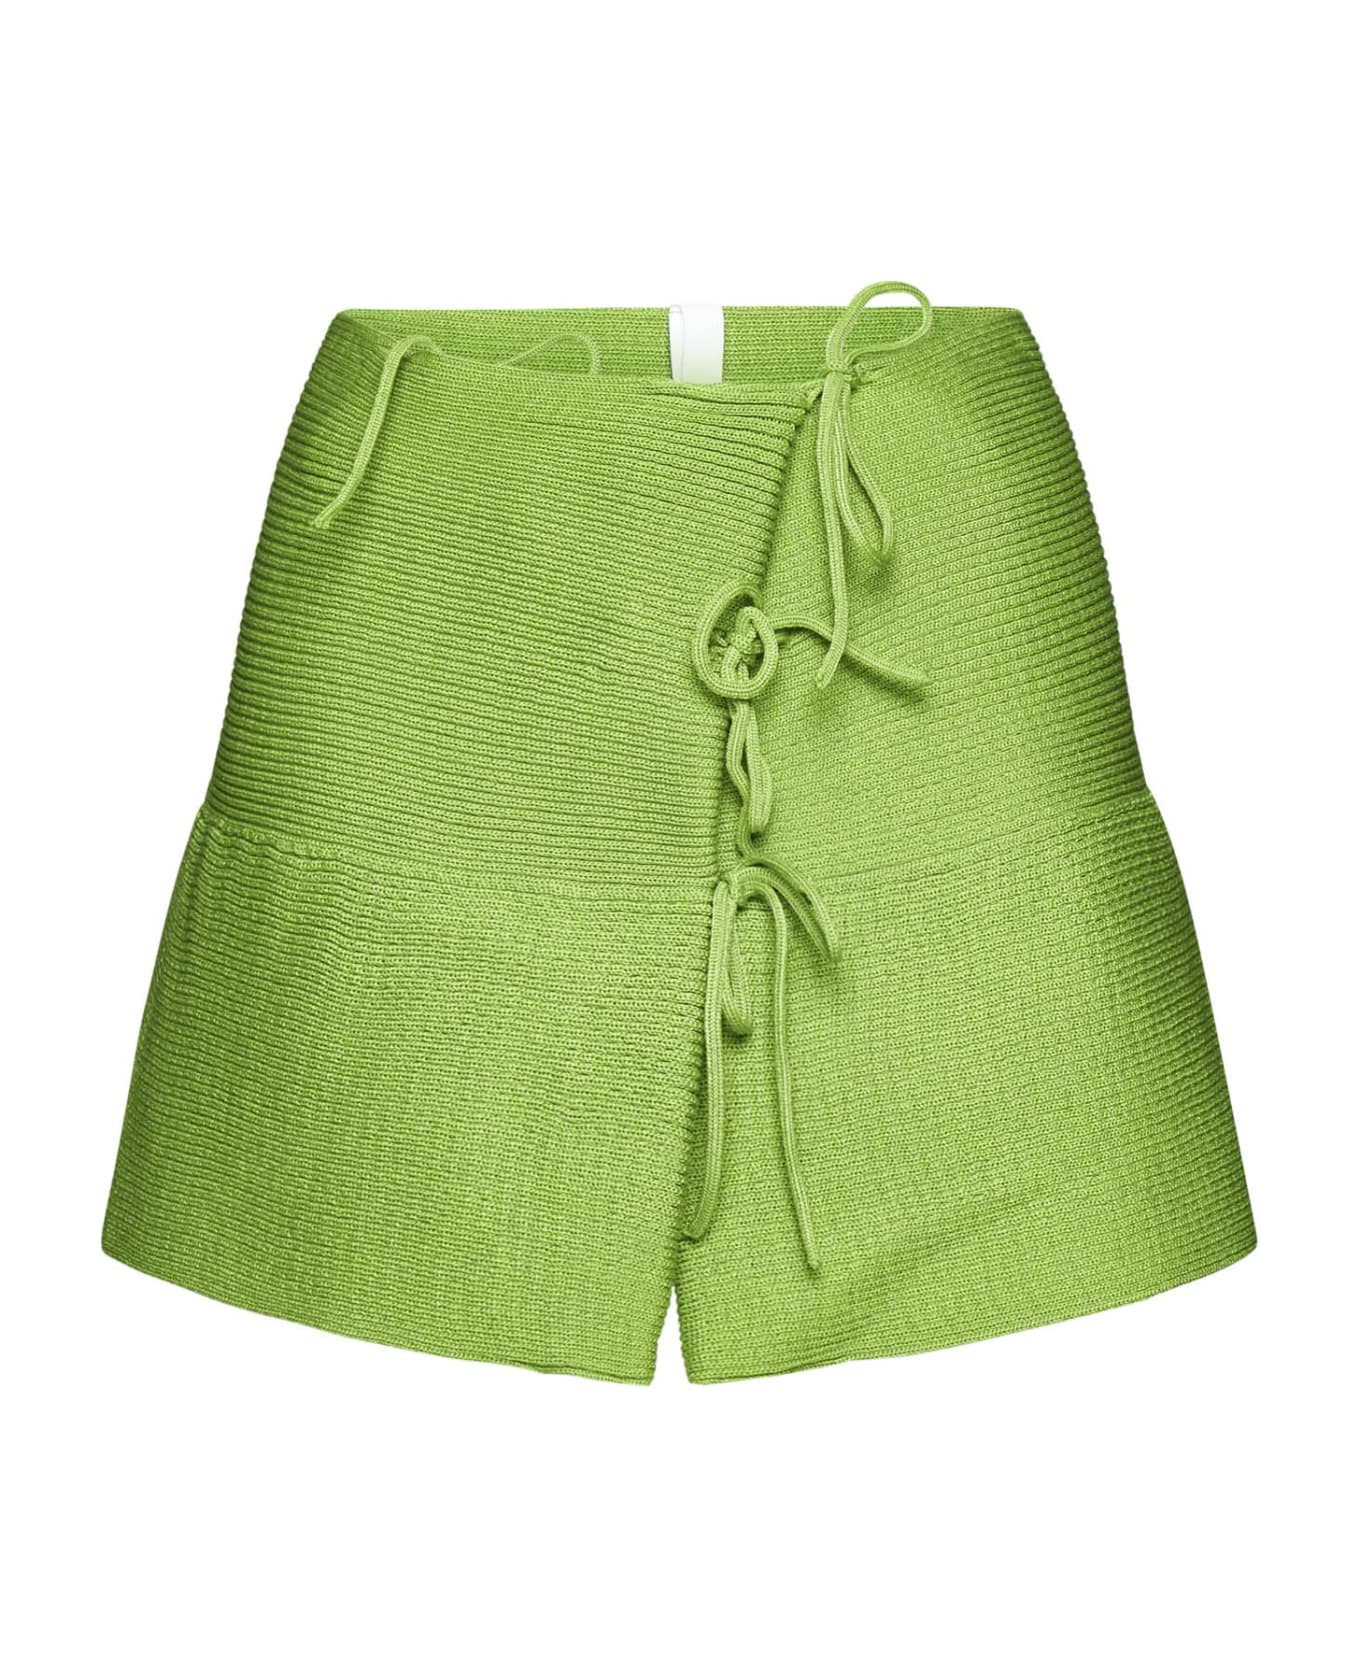 A. Roege Hove Skirt - Apple green